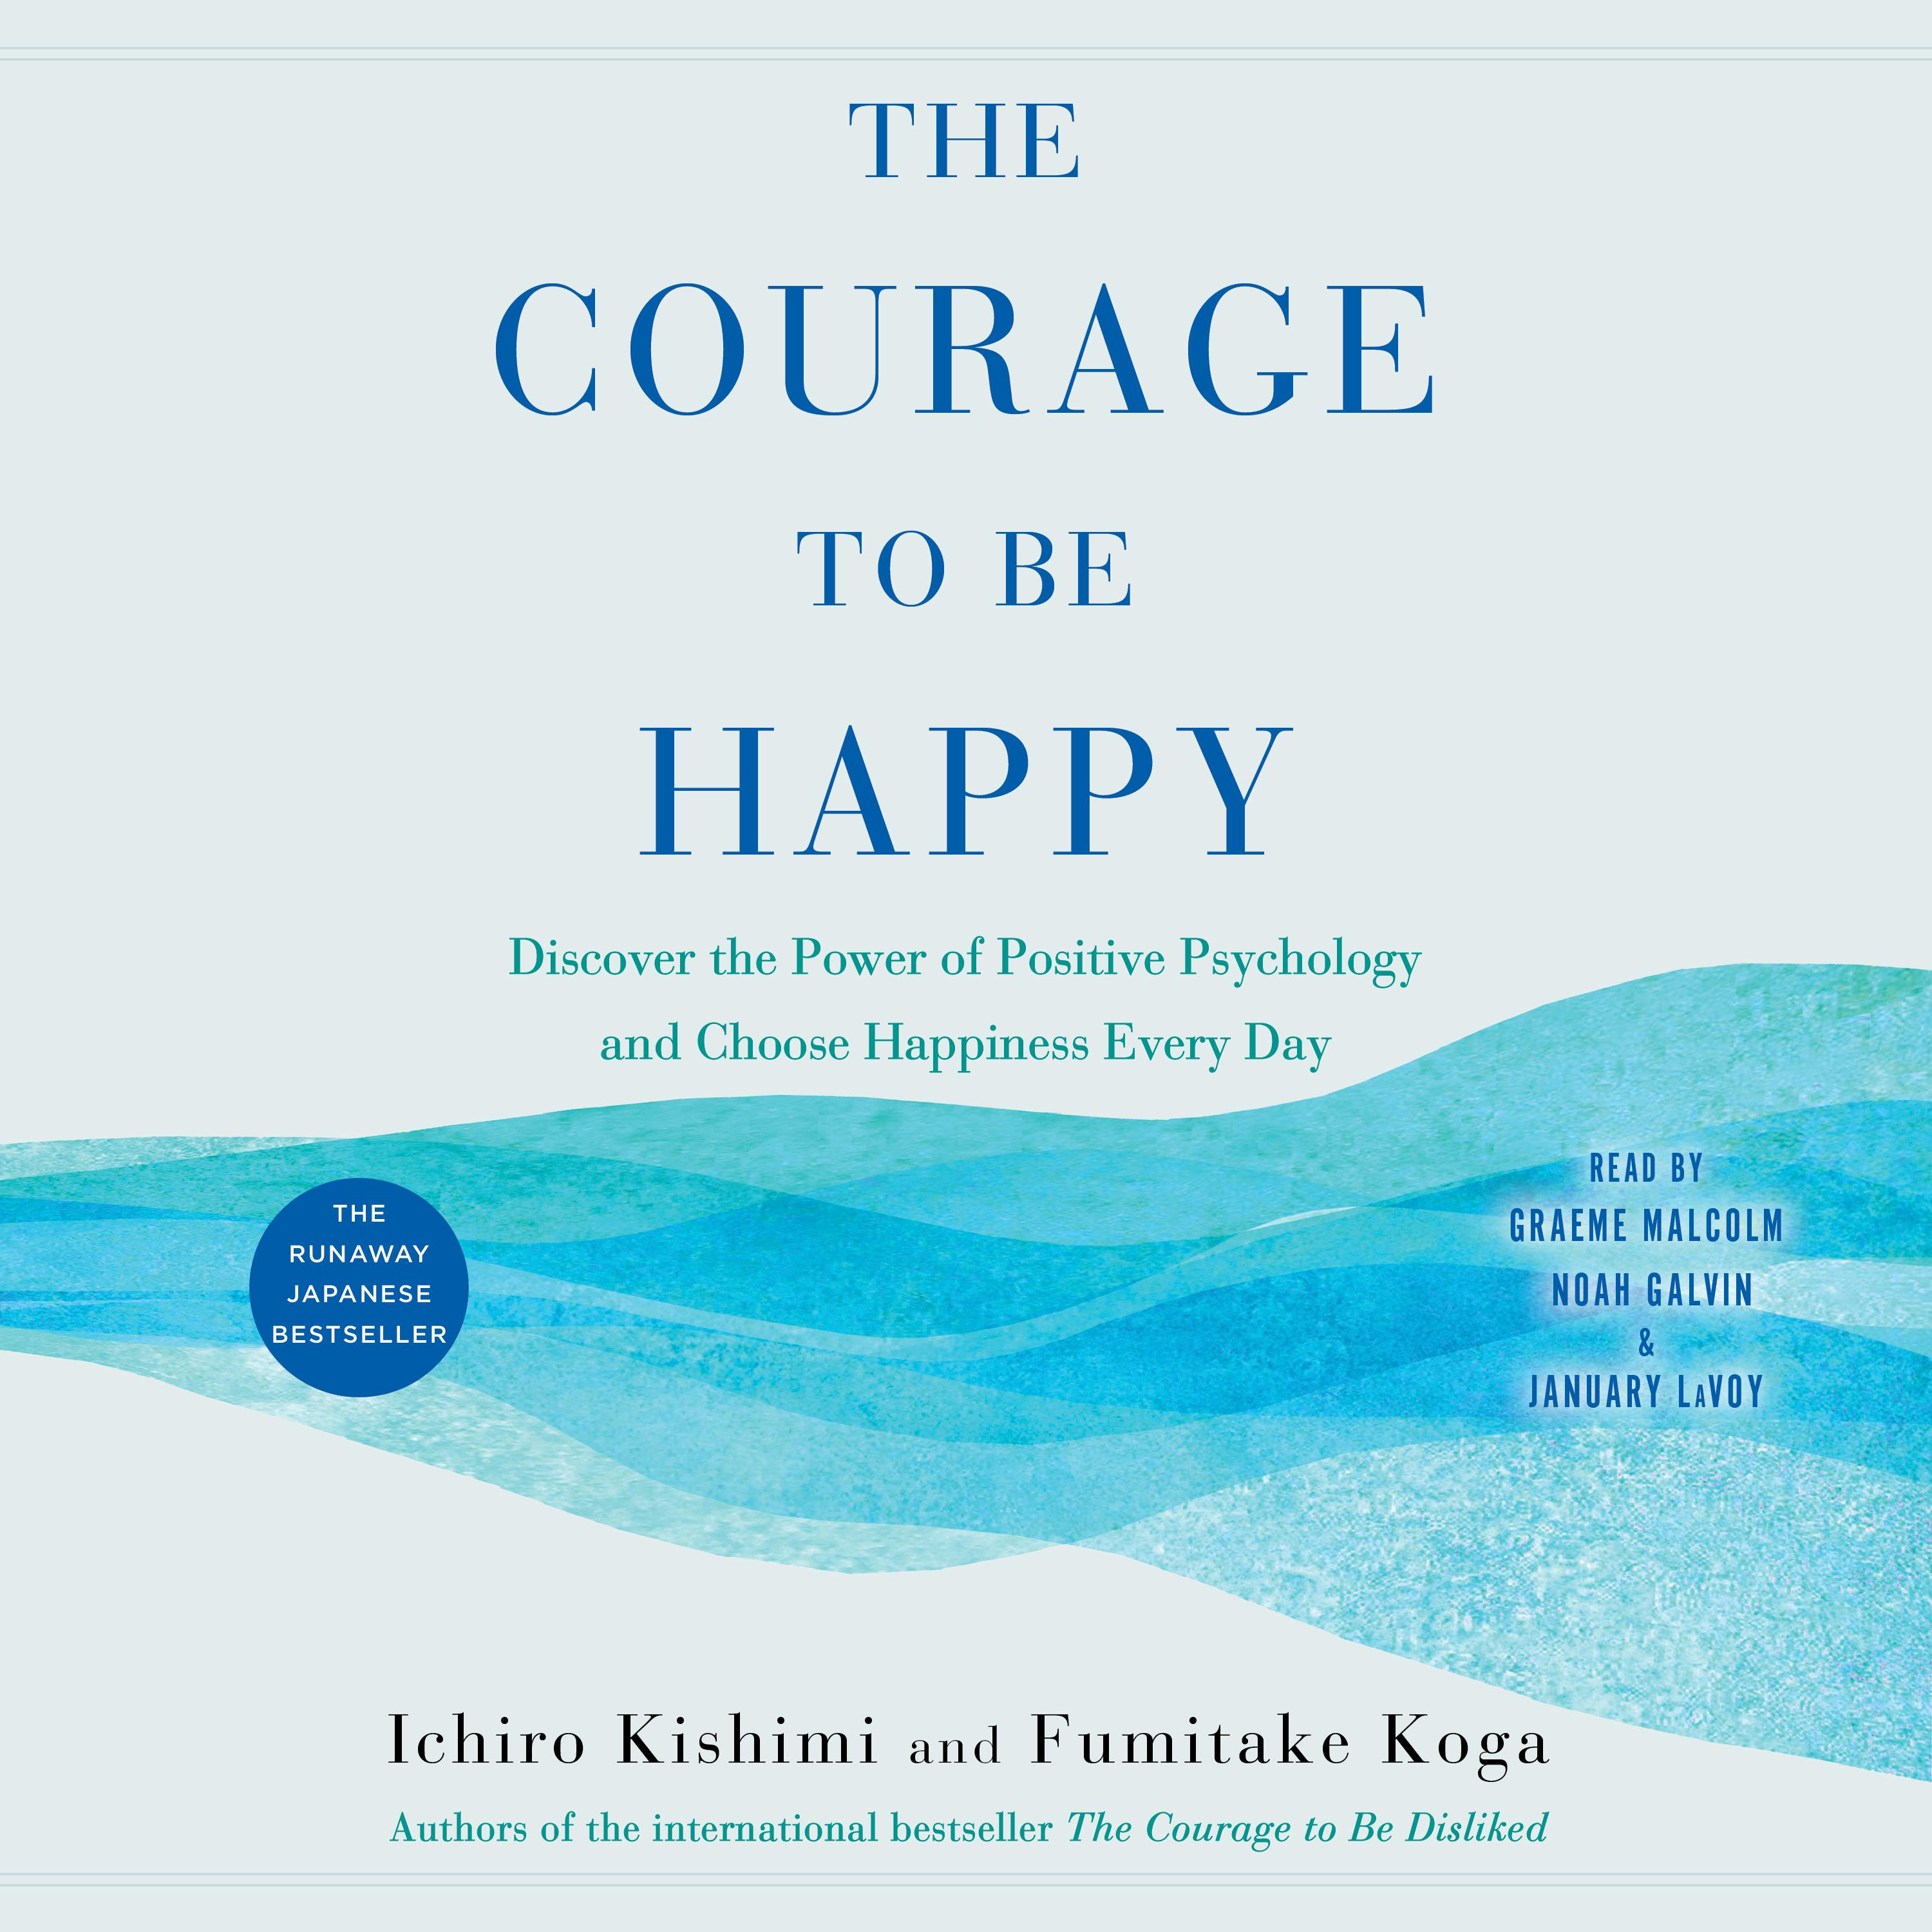 The Courage to Be Happy: Discover the Power of Positive Psychology and Choose Happiness Every Day - Ichiro Kishimi, Fumitake Koga